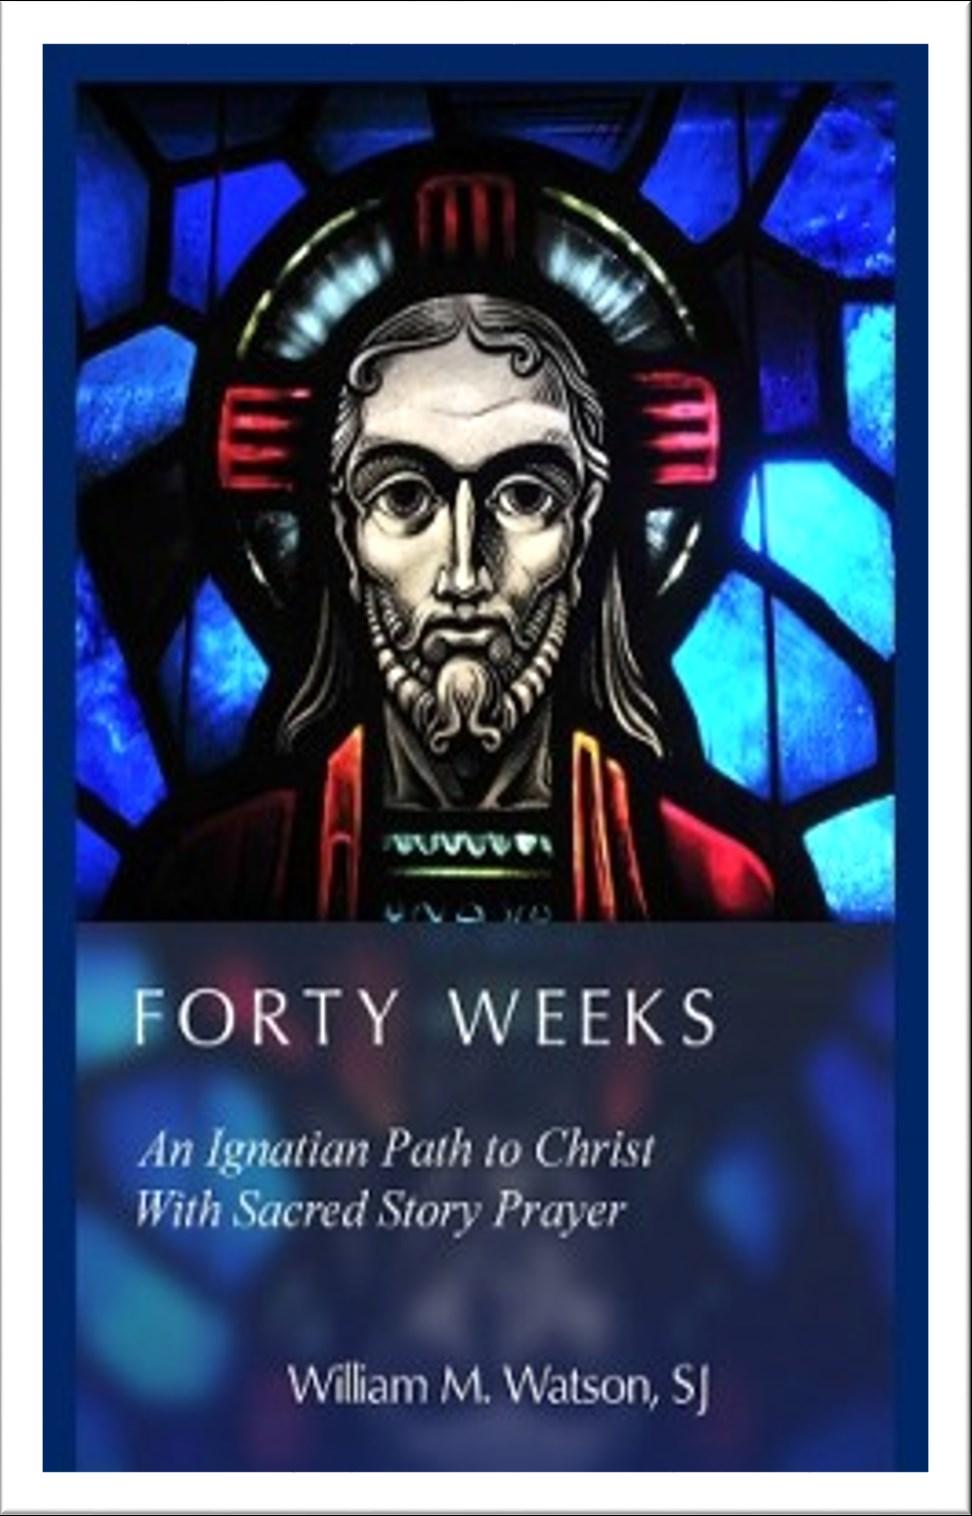 Forty Weeks Program Learn how to encounter the Lord of Mercy daily. Learn to fruitfully engage in regular Sacramental Reconciliation.